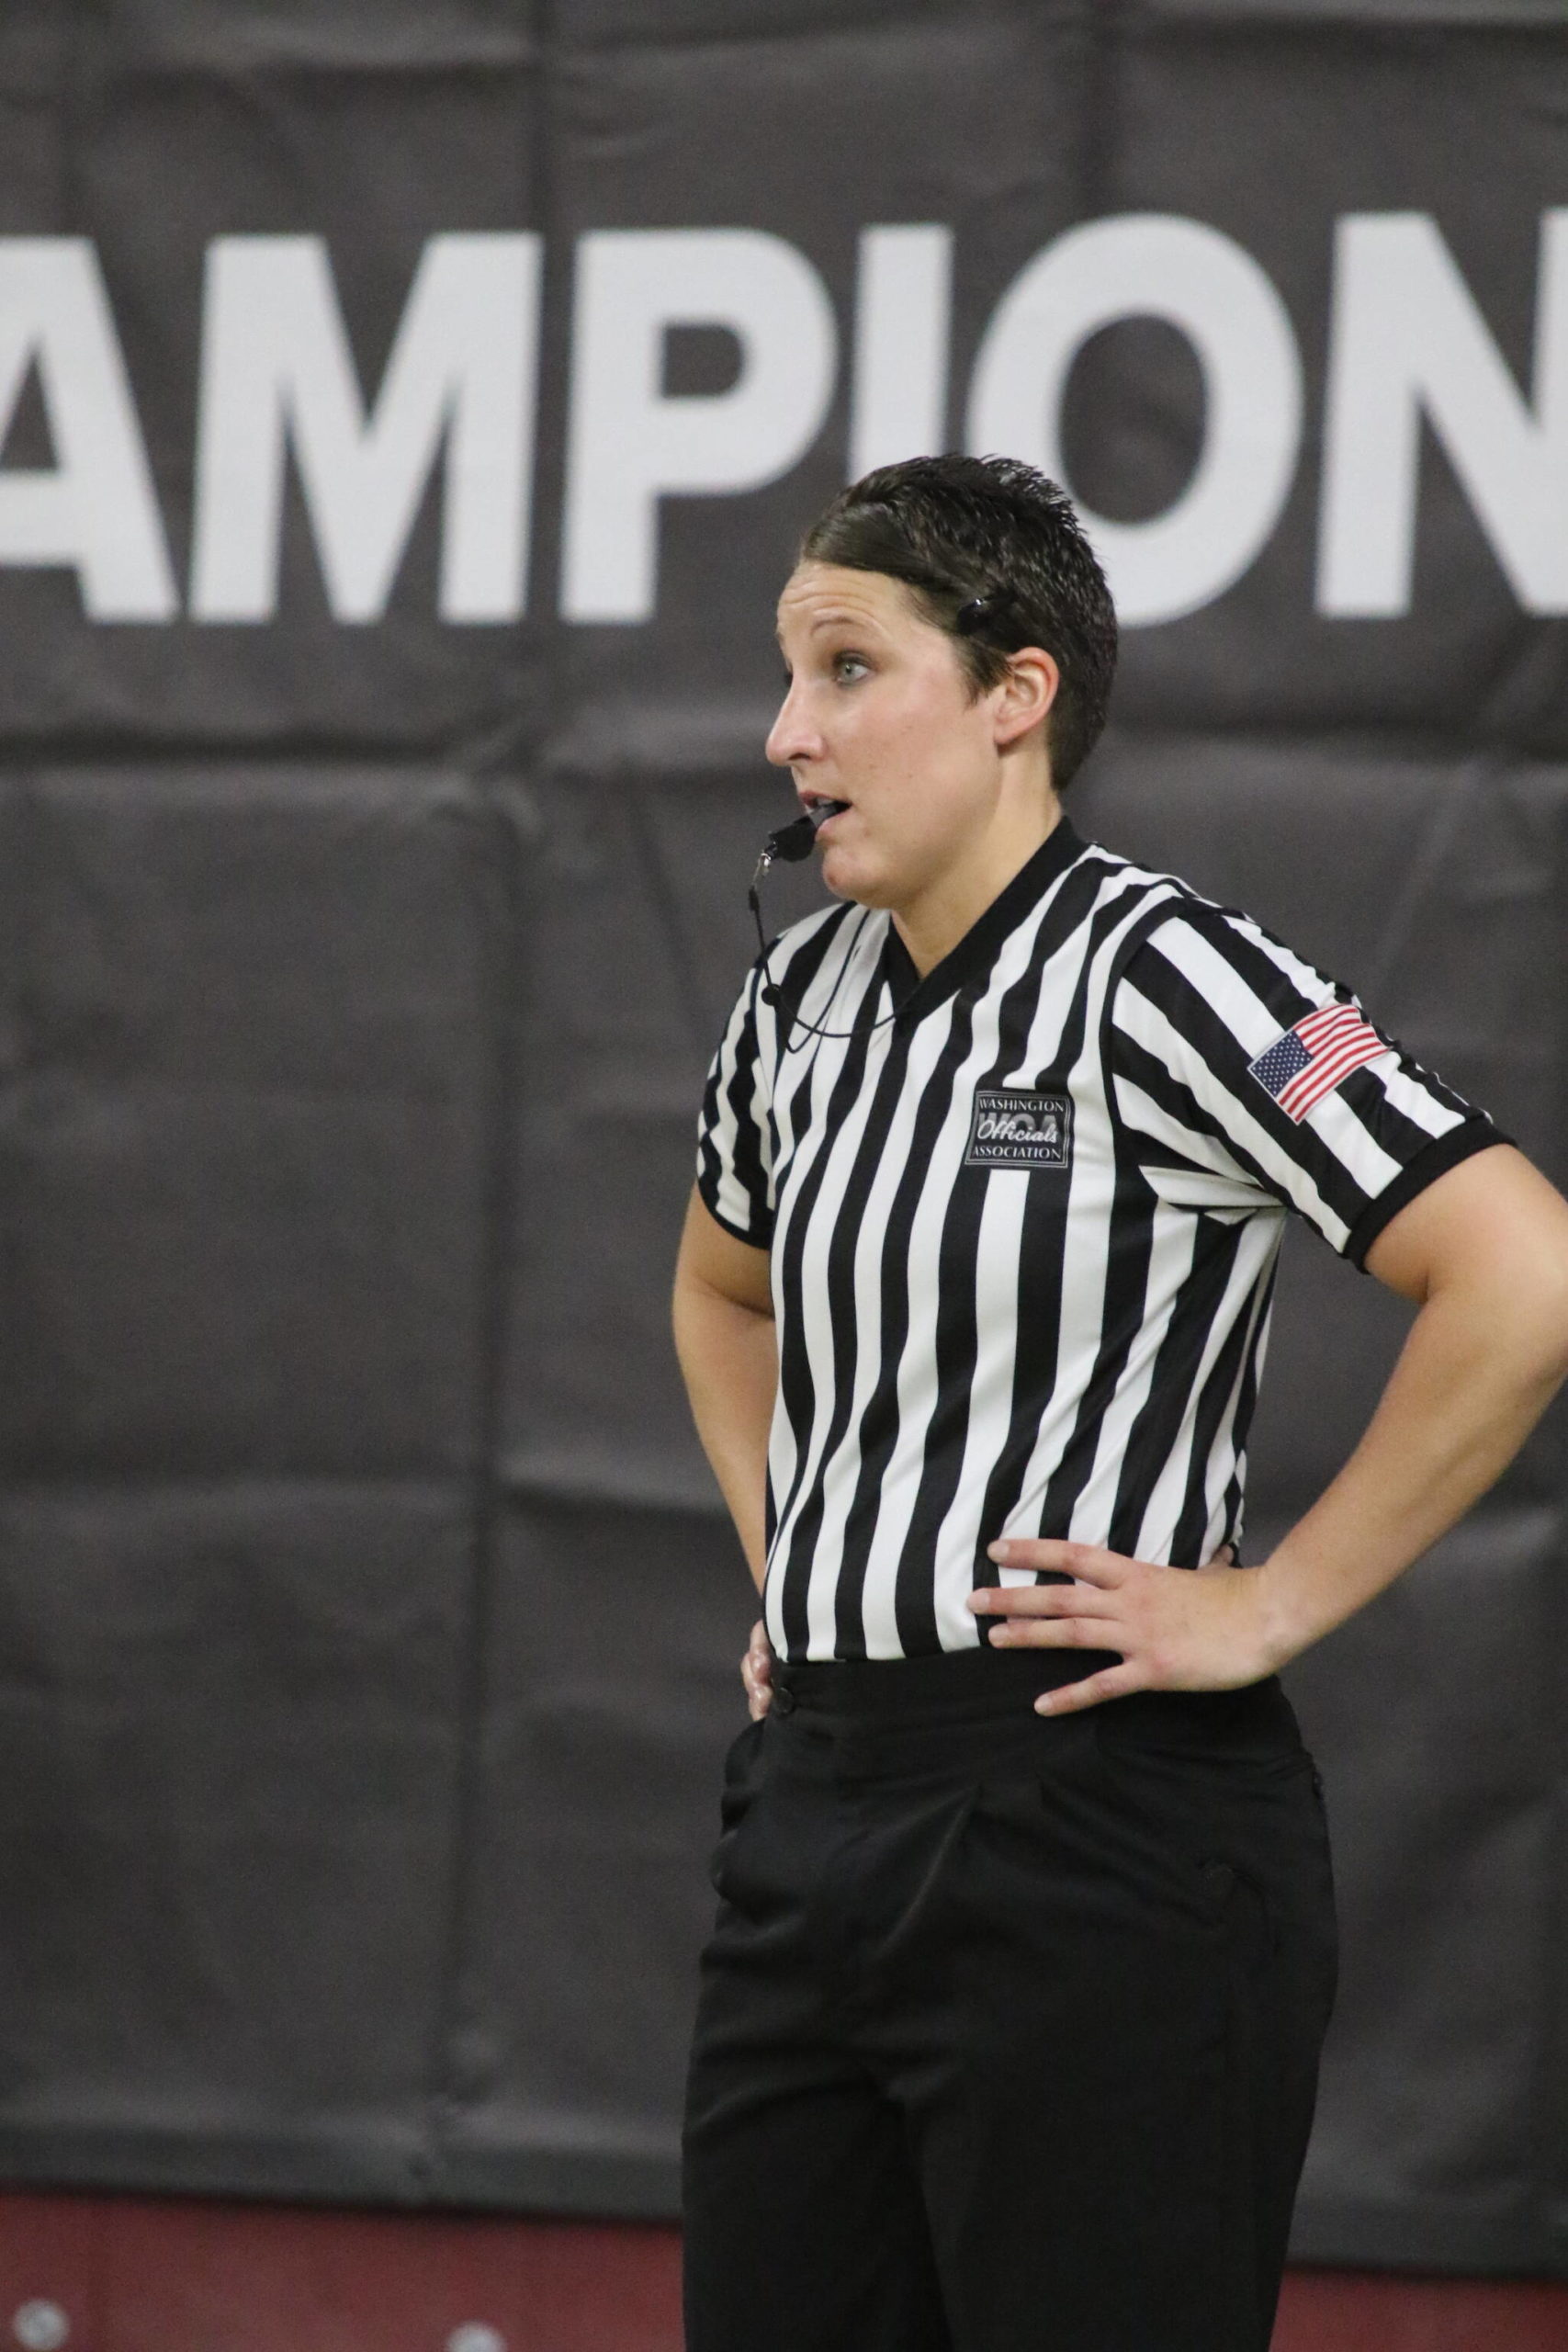 Photo courtesy of Northwest Sports Photography
Hoquiam Middle School teacher Megan Pumphrey officiates a game at the WIAA state basketball tournament in Yakima. Pumphrey was the only female referee present at the A-tournament level.